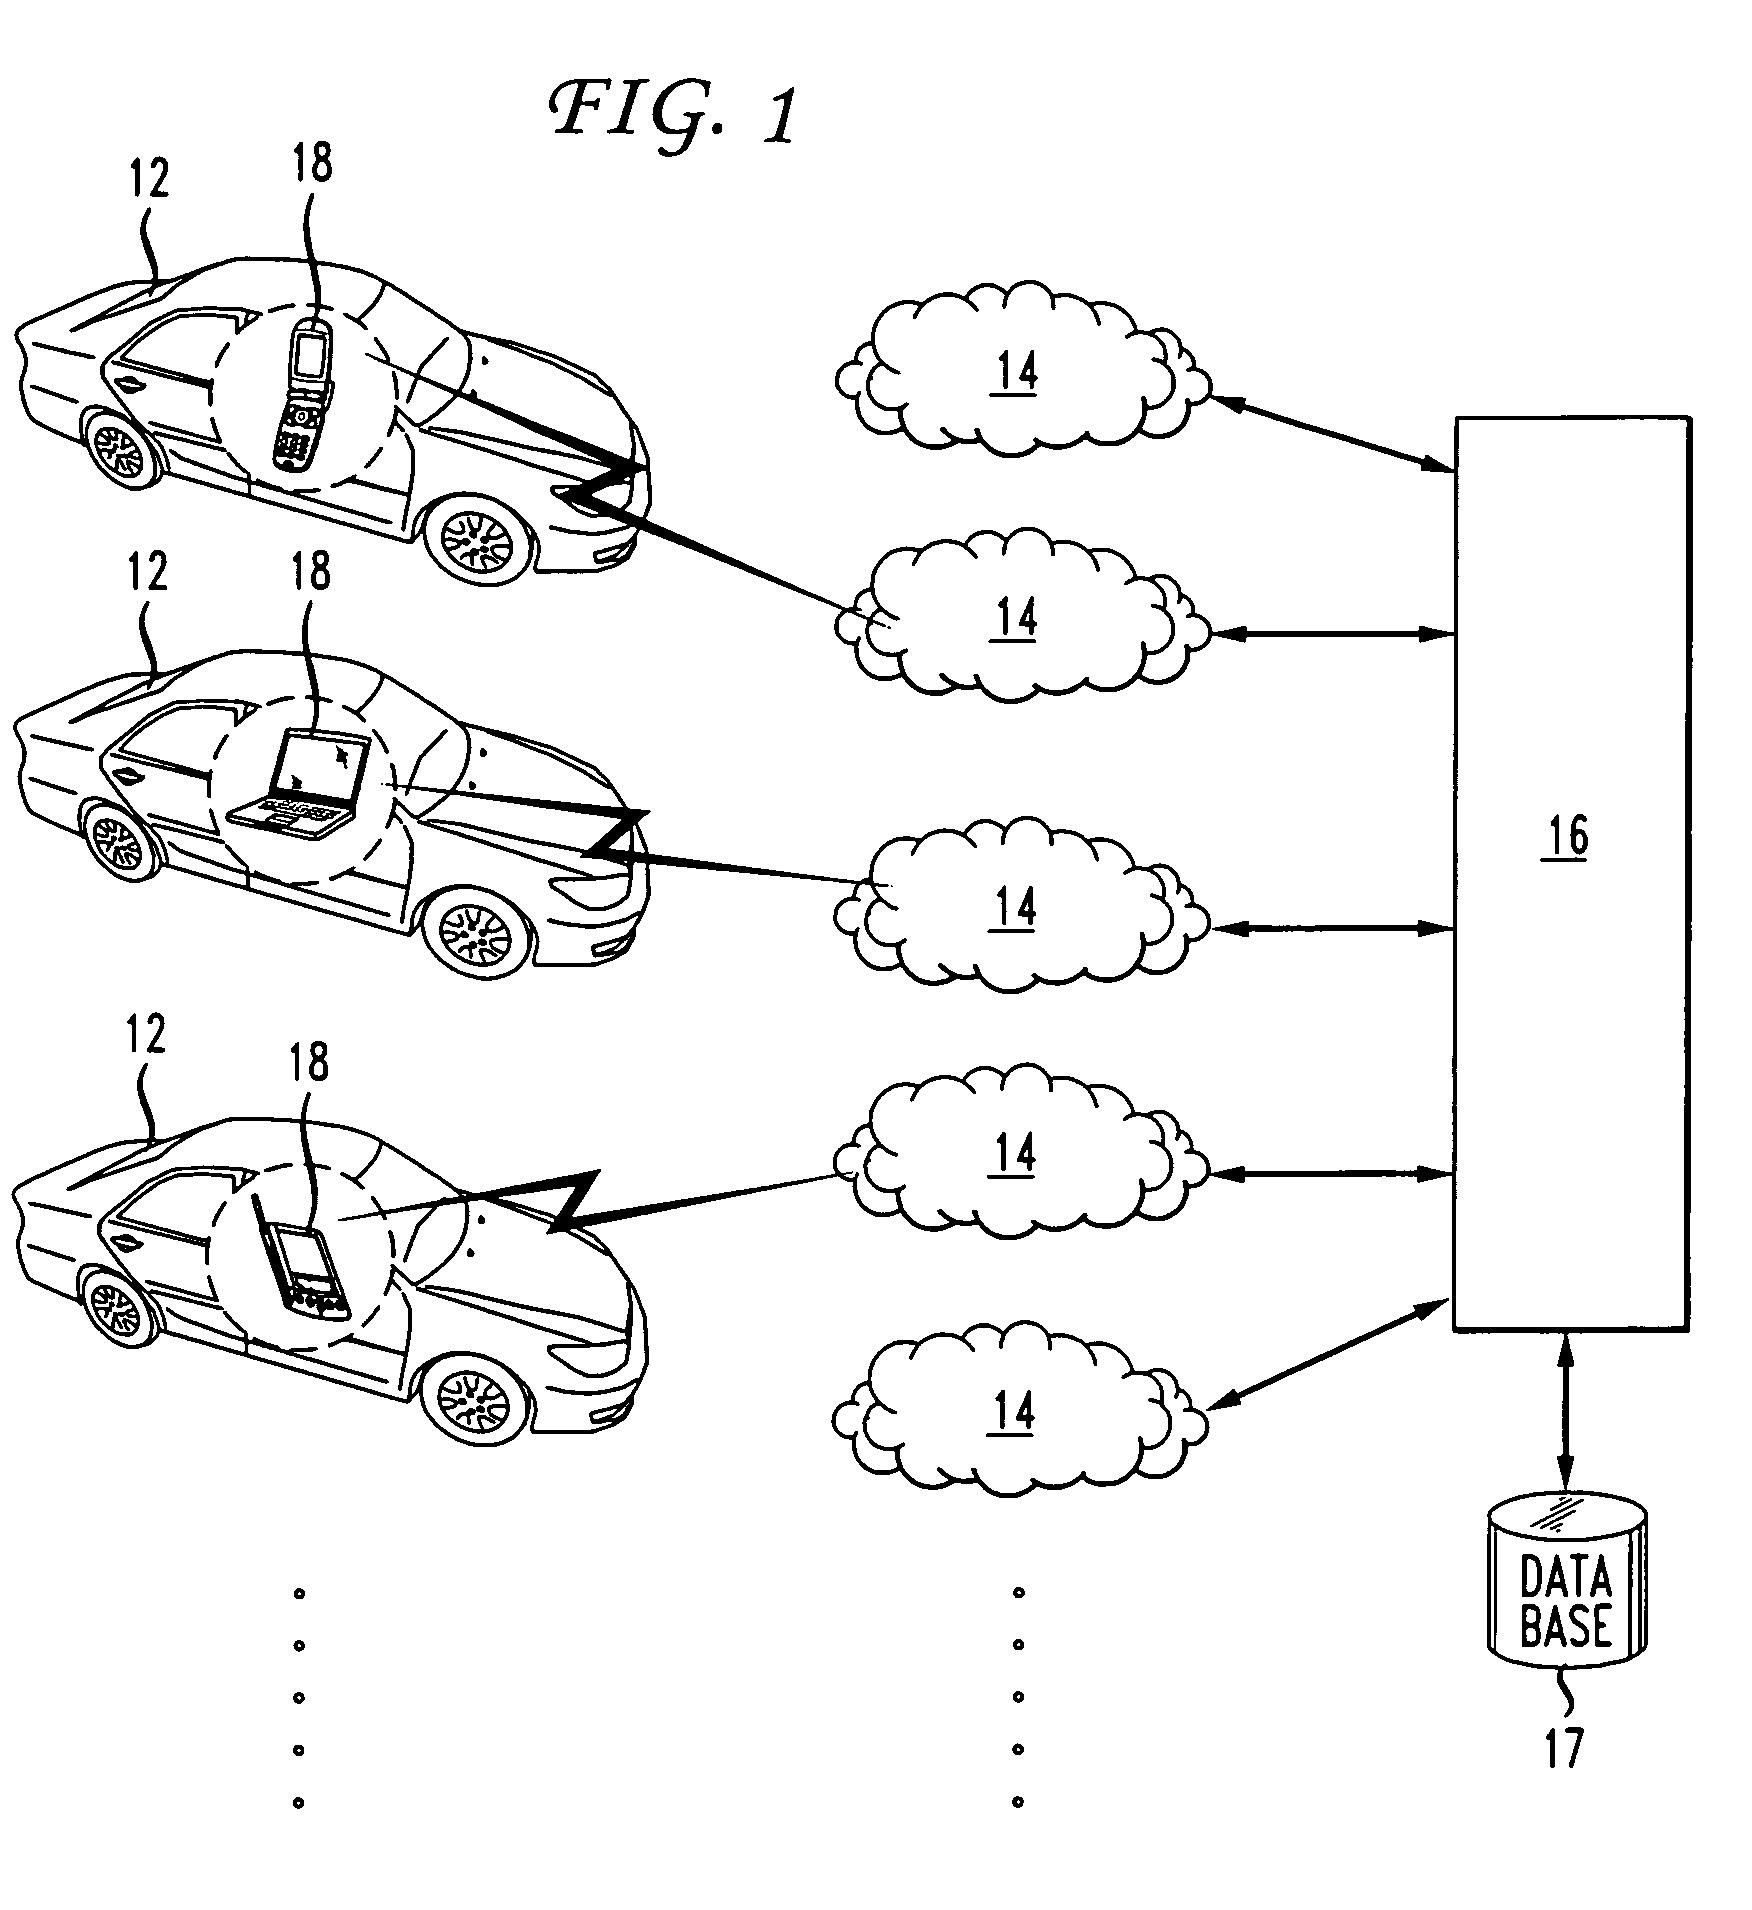 System and method for determining traffic conditions